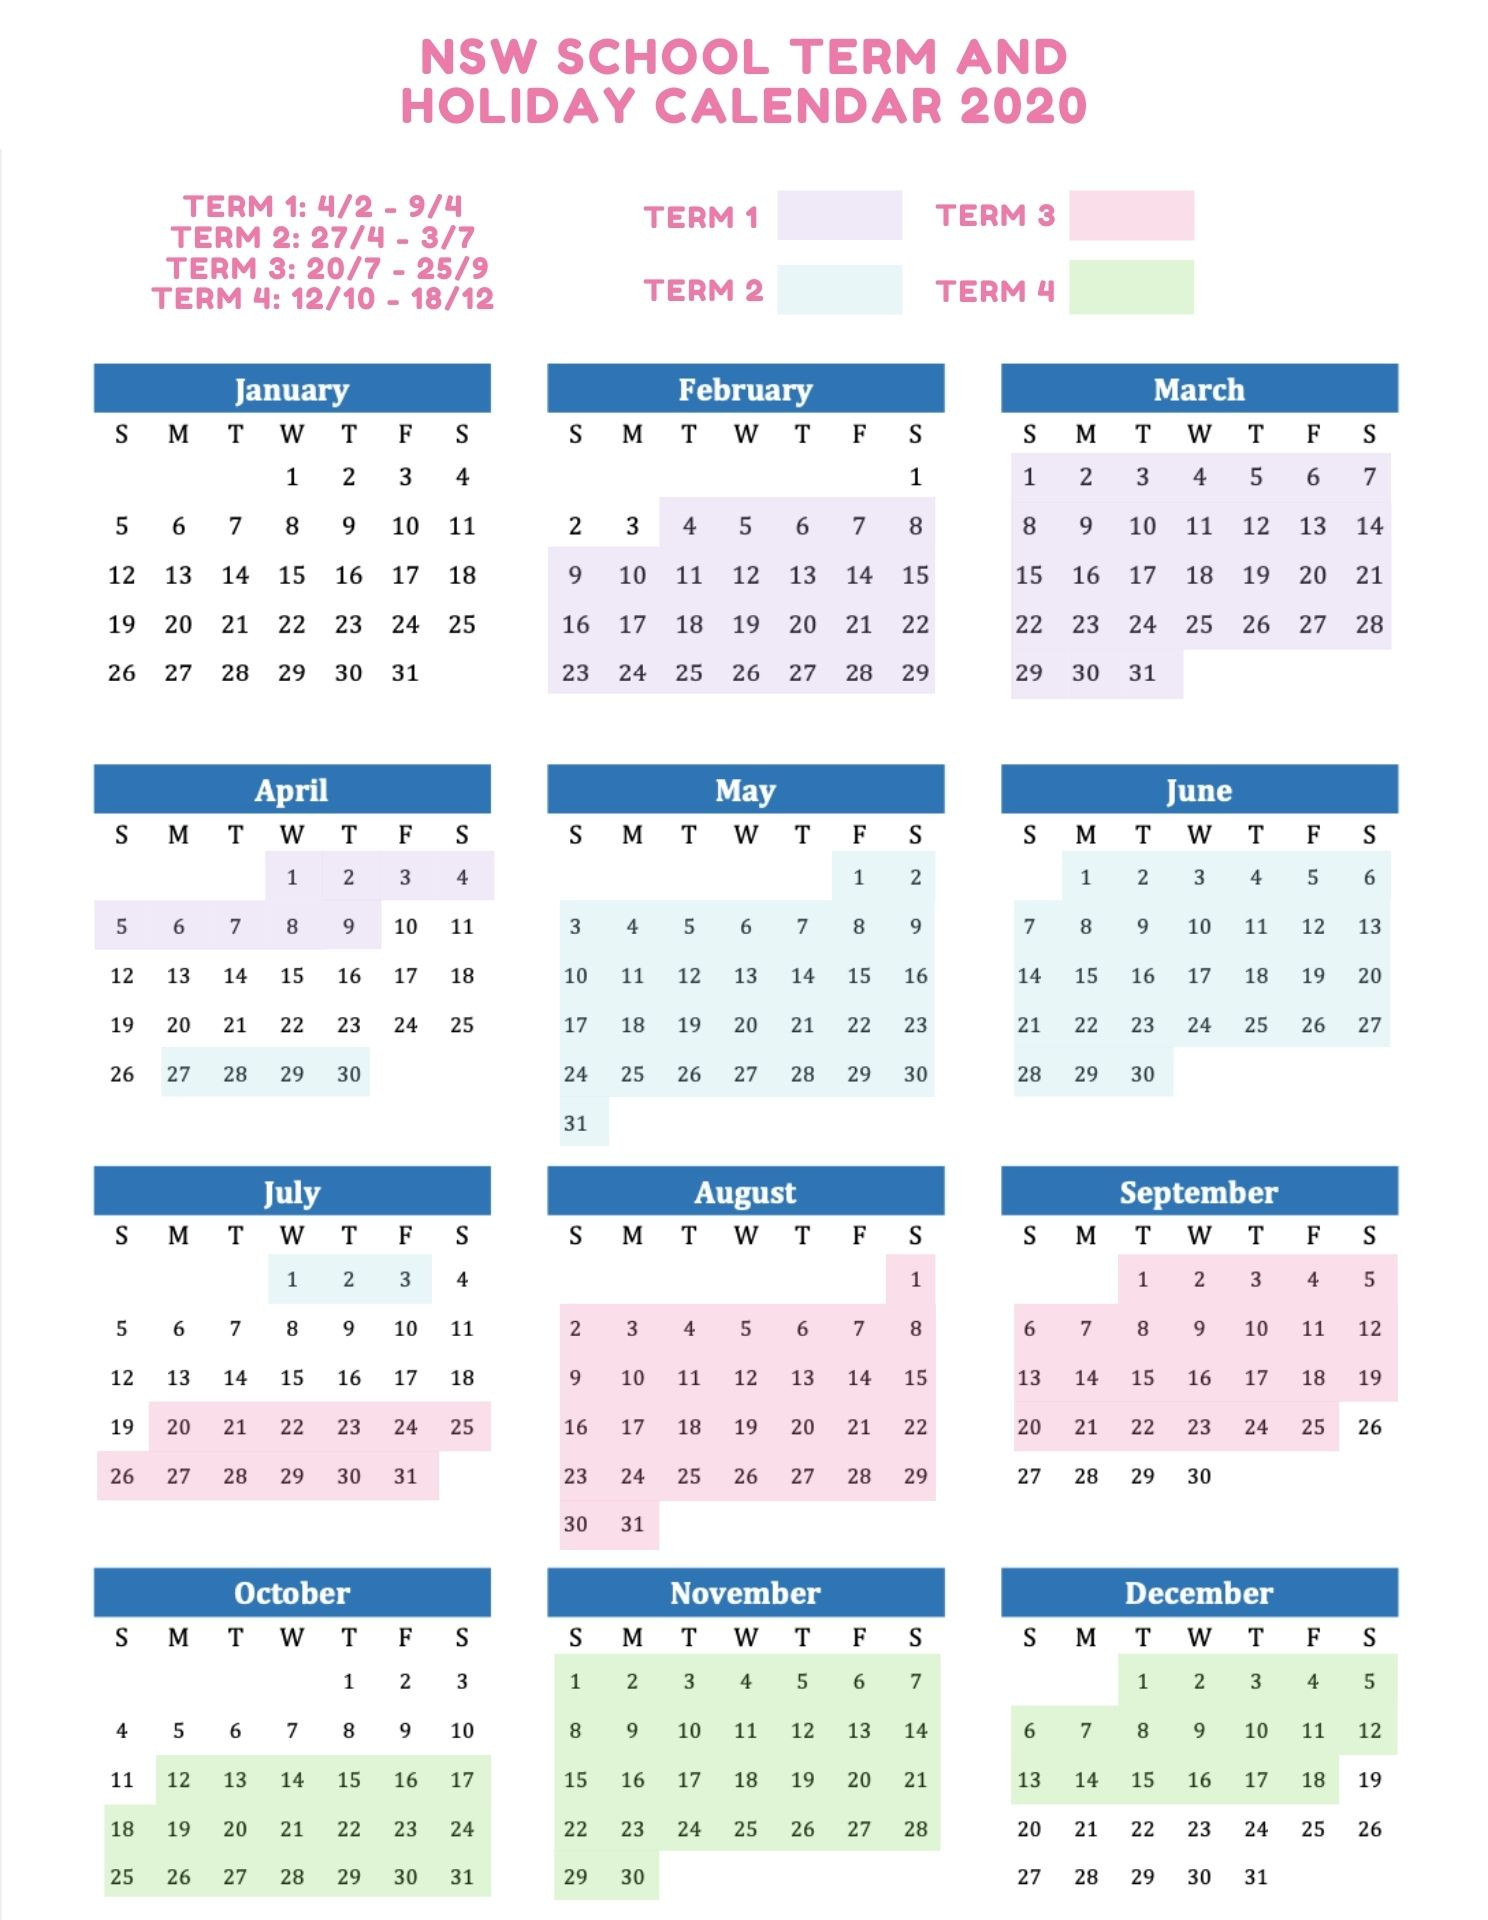 School Holidays And Term Dates Australia 2020/2021-Download 2021 Calendar With School Terms And Public Holidays